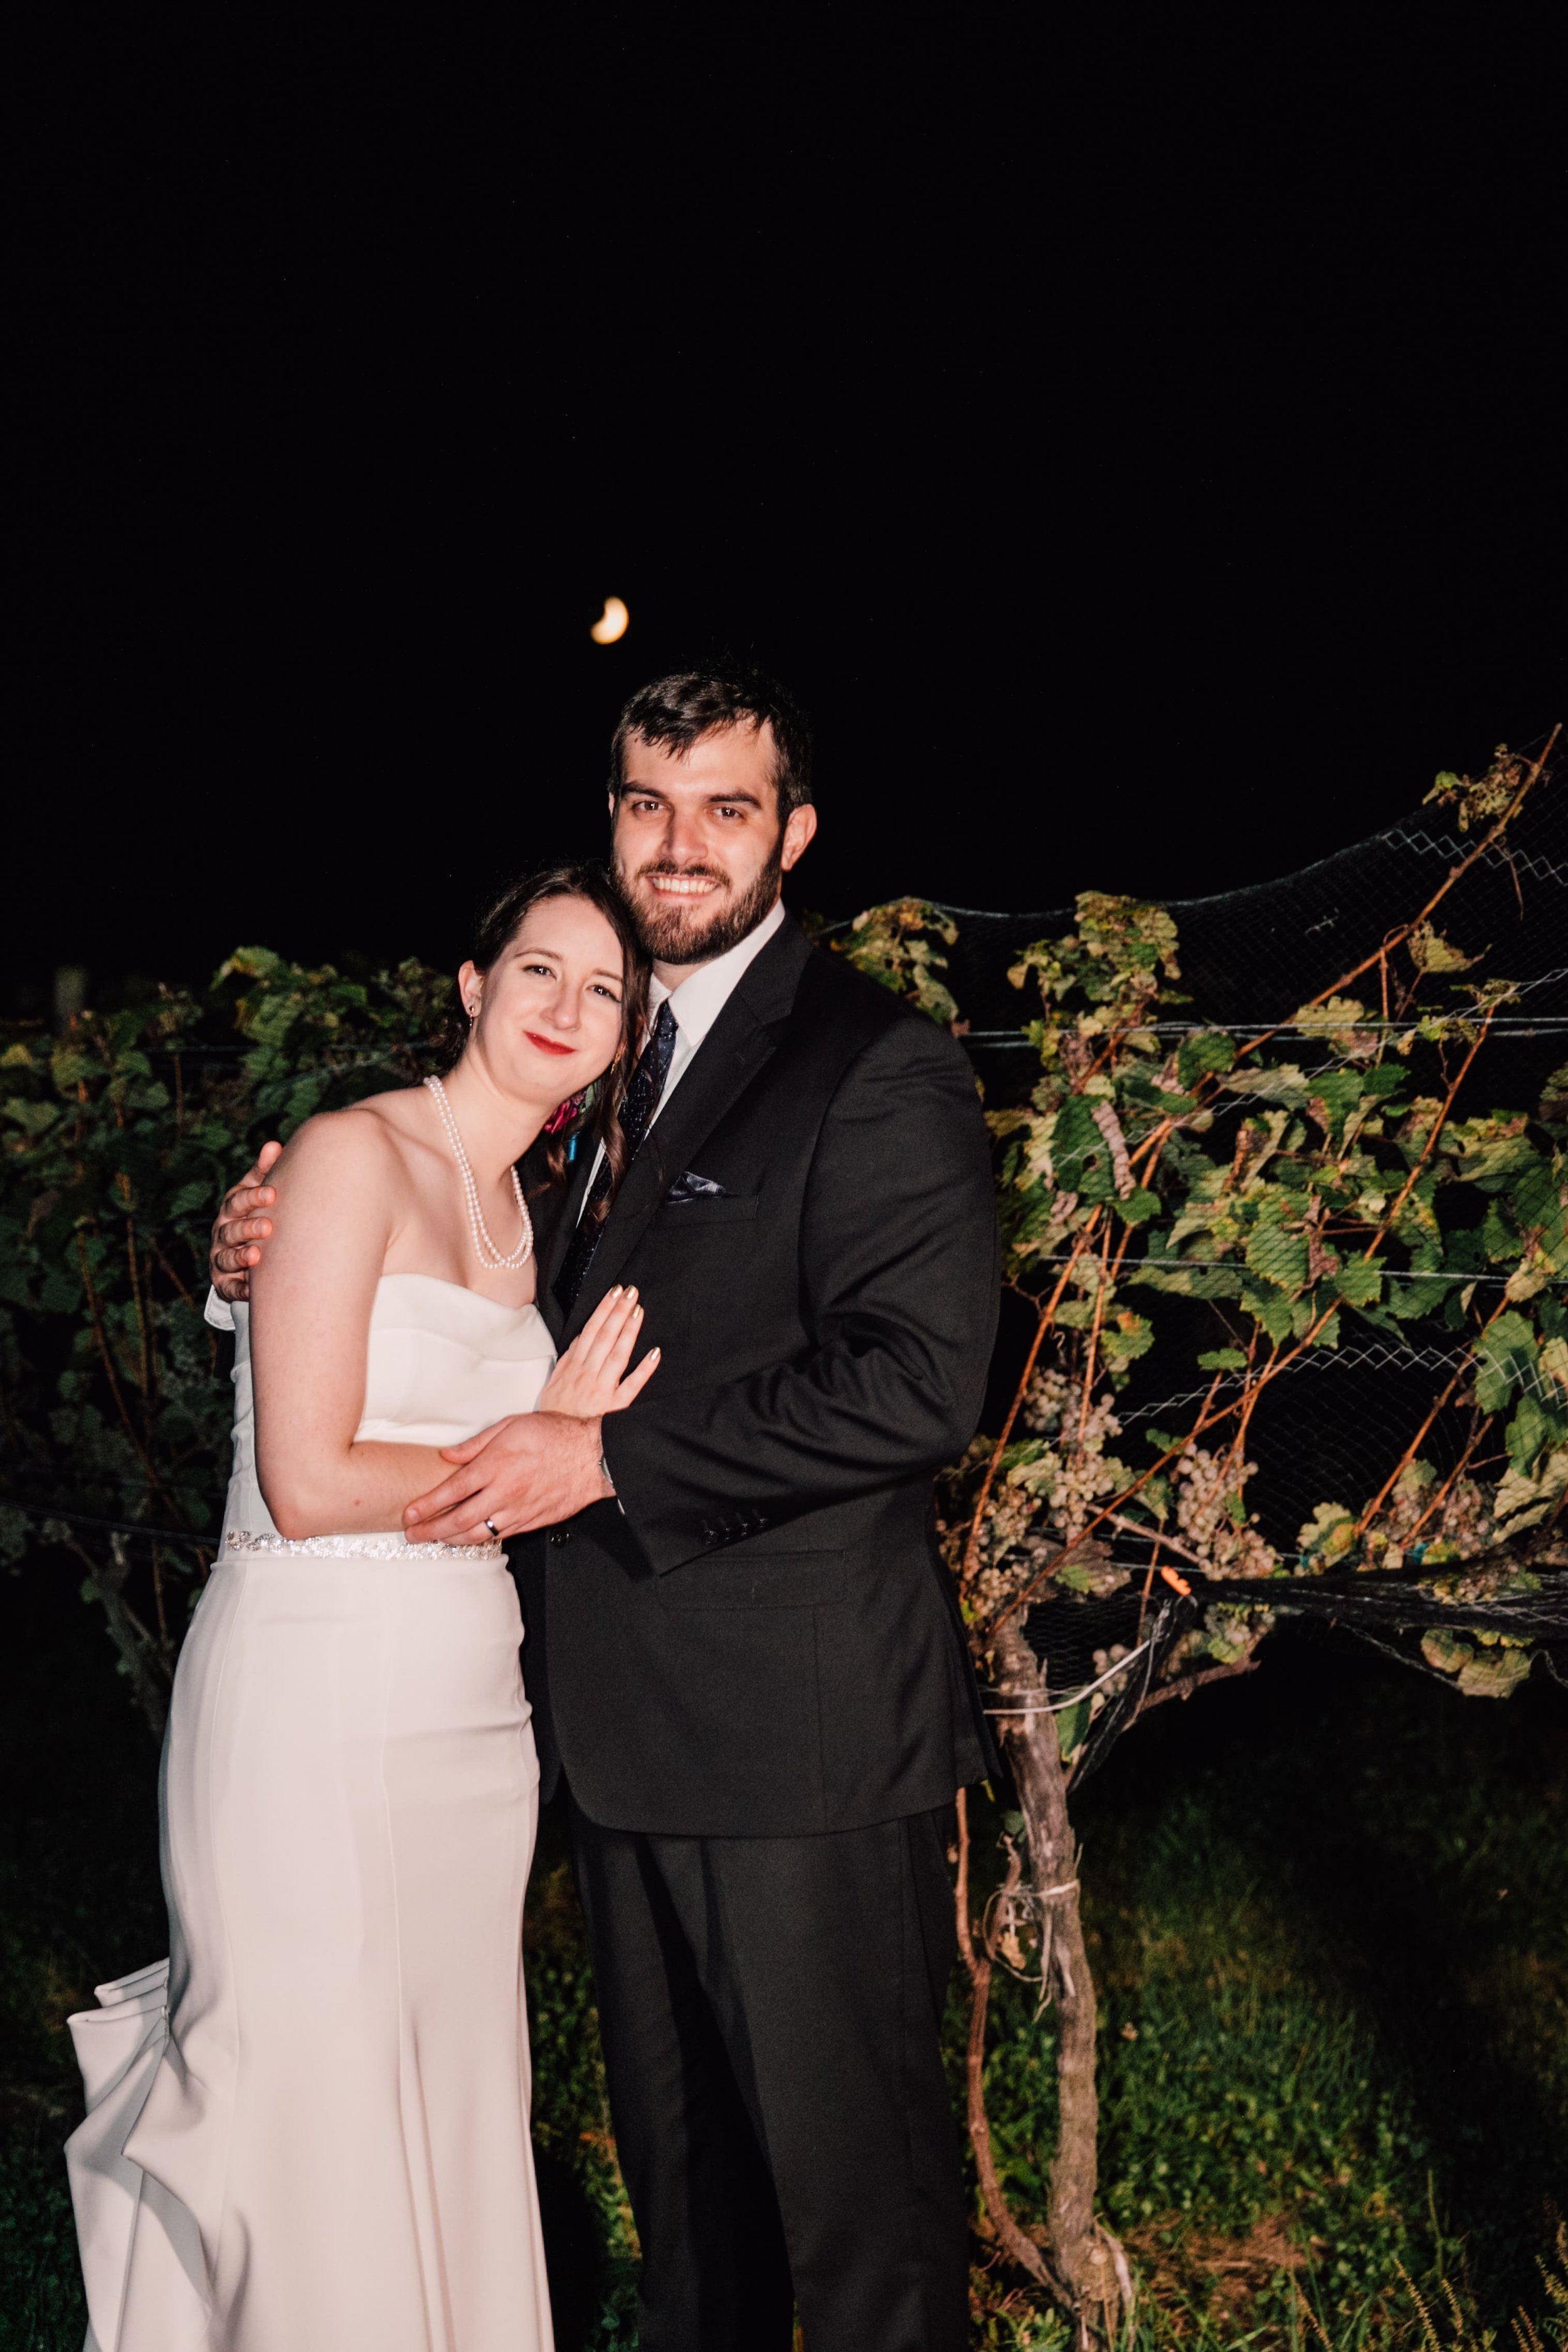  the bride and groom smile under the moon at their space wedding 